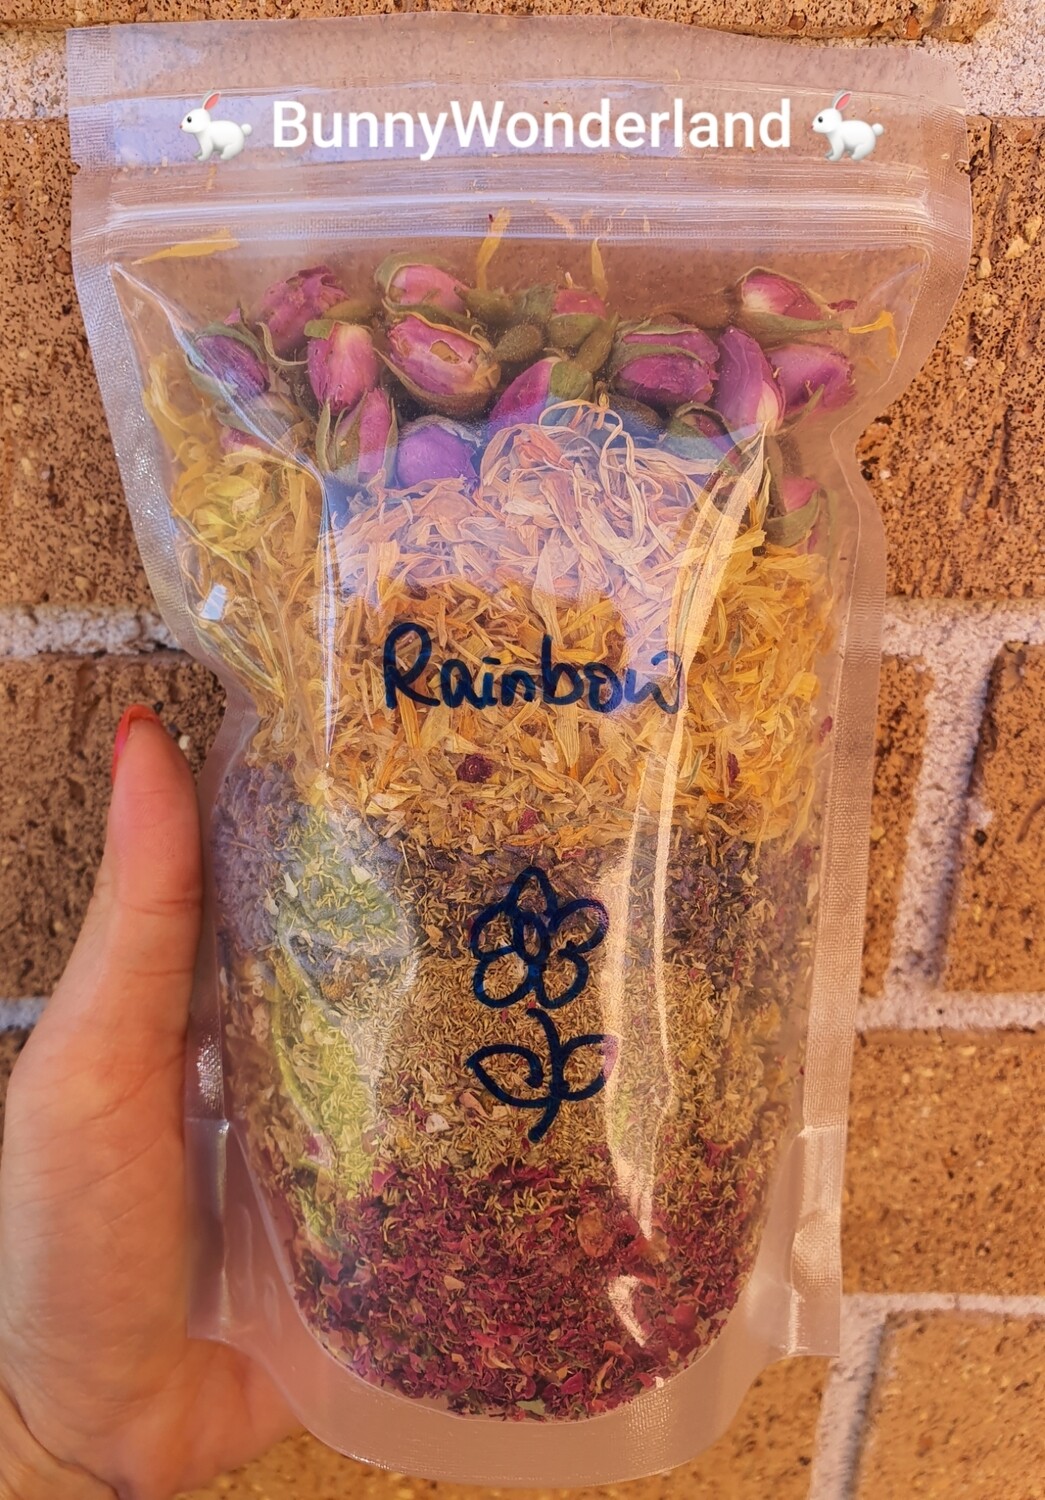 Rainbow Floral Mix Hay/Pellet Toppers 75g 